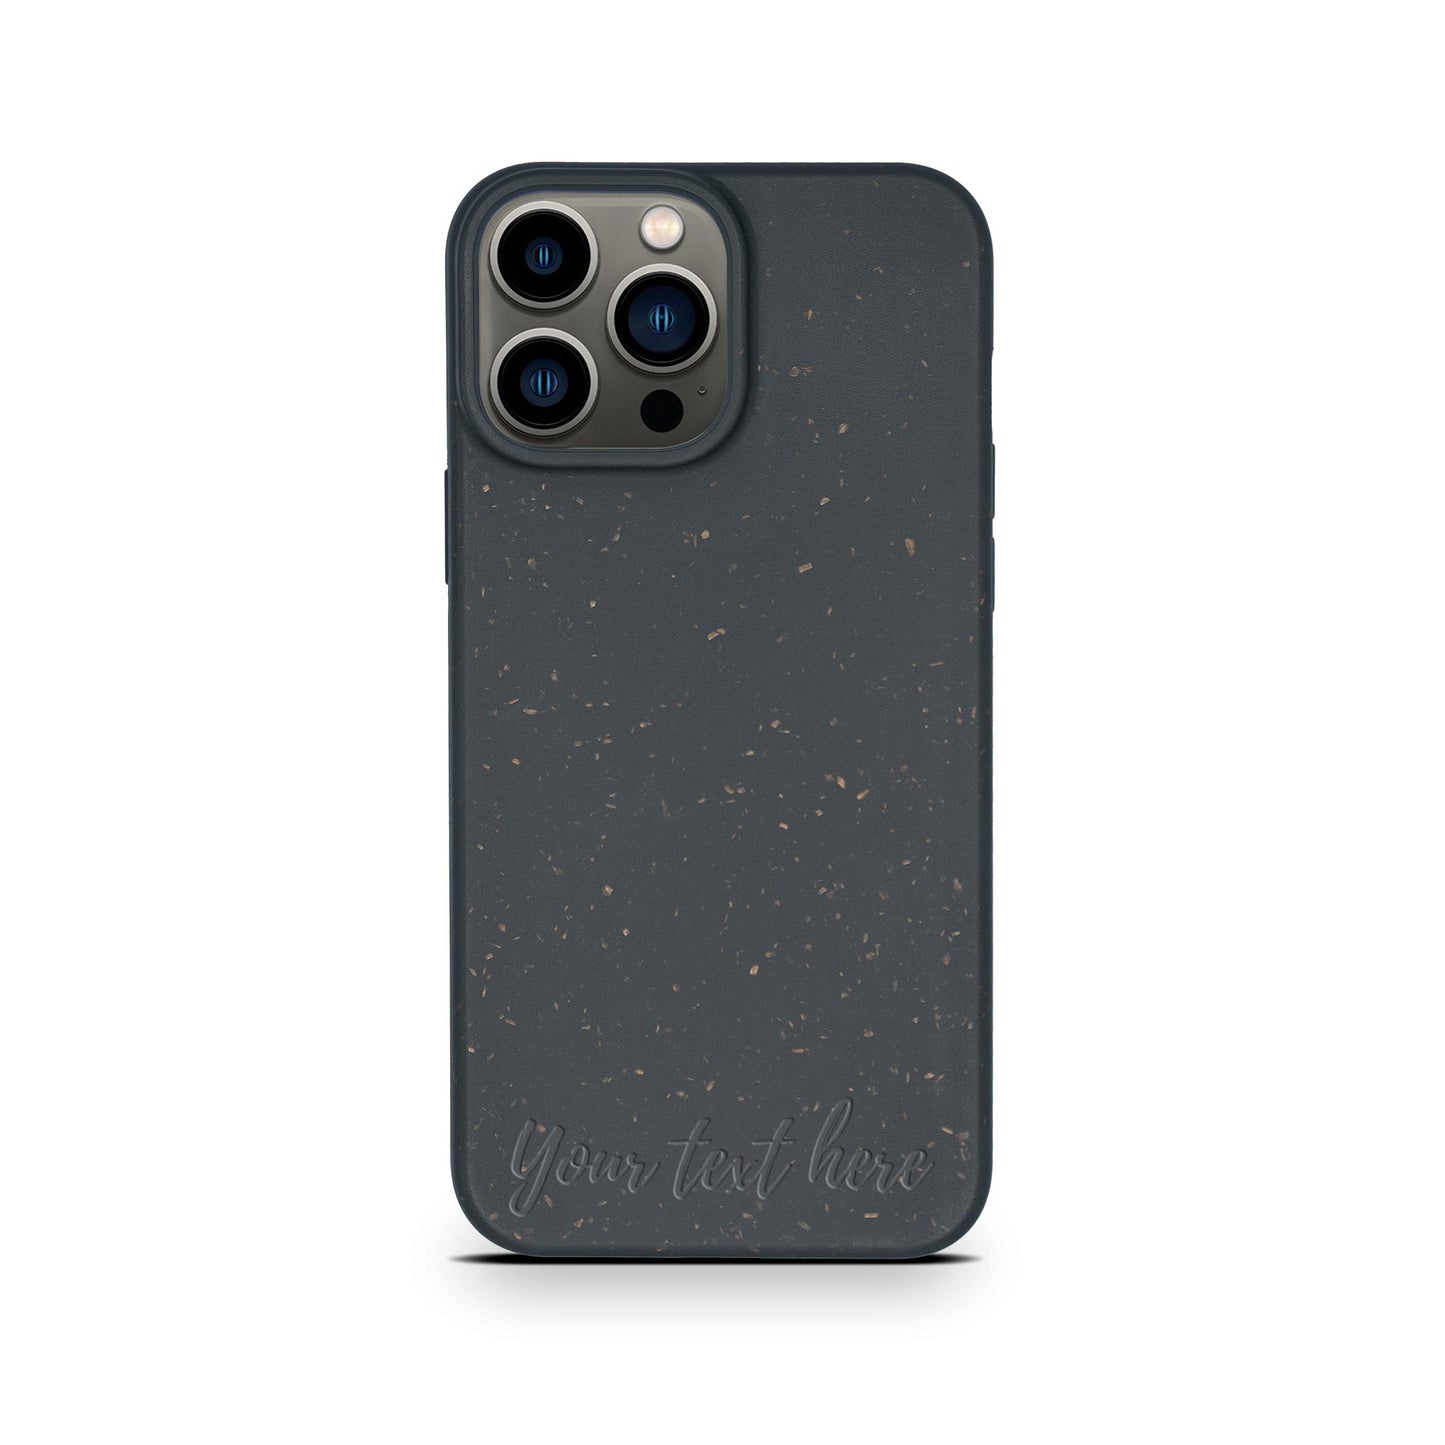 Tan Lily Biodegradable Personalized Black Iphone Case with speckled design and customizable text area, featuring triple camera cutouts.